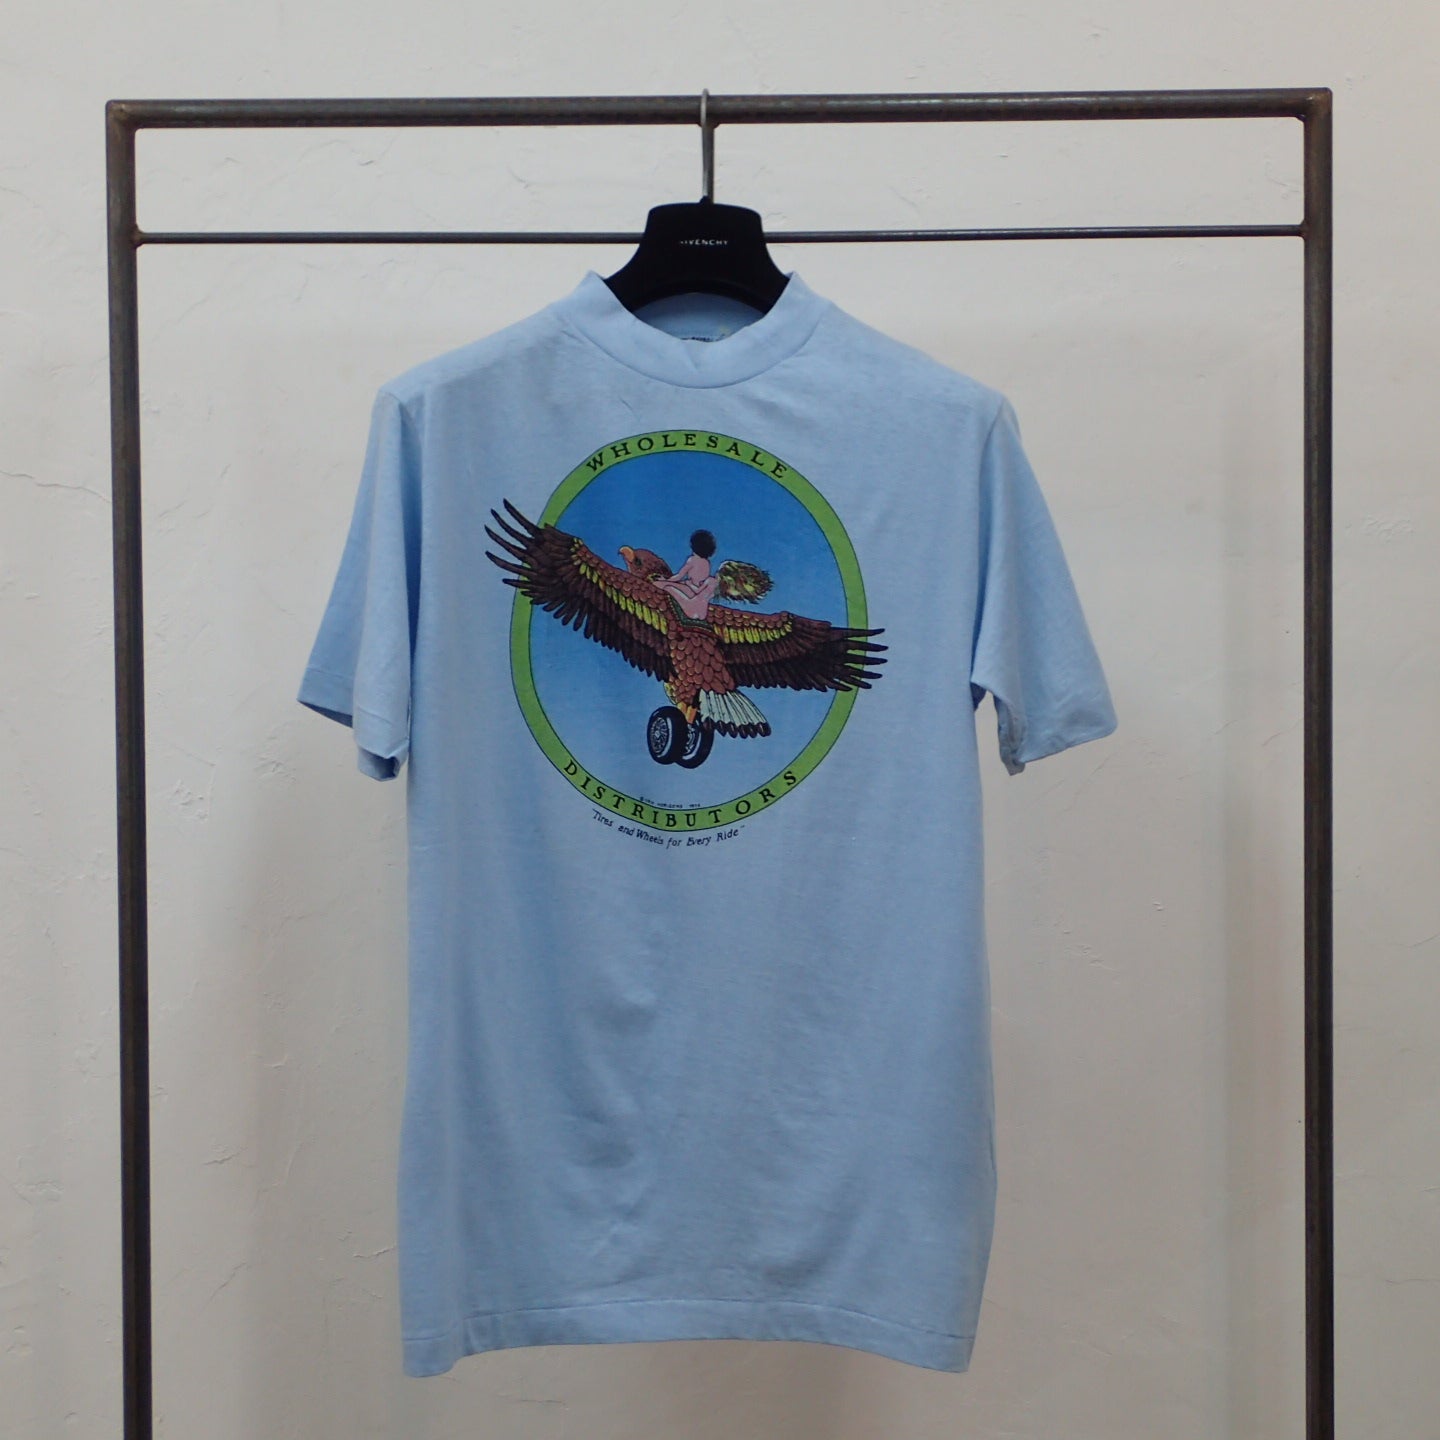 T-shirt MONSTER CORPORATION des années 70 "Eagle and Wheels tee"